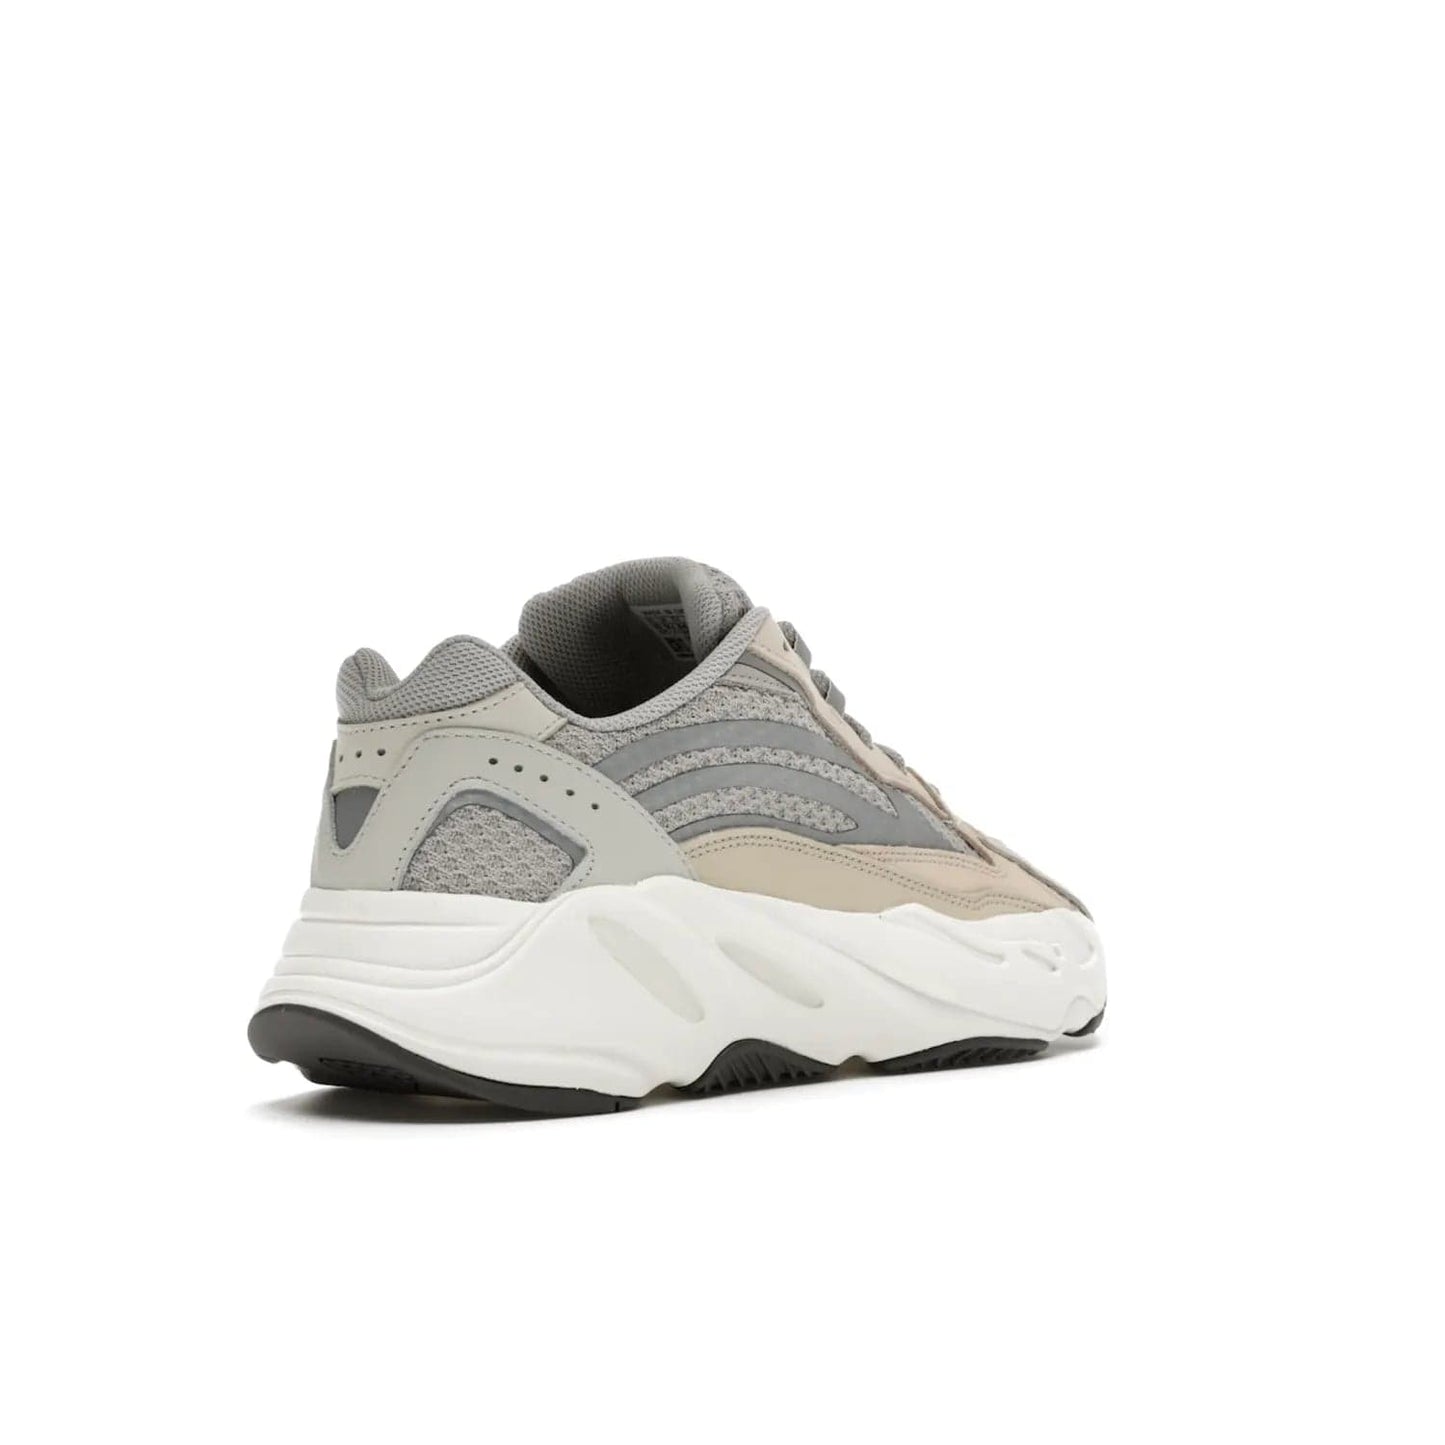 adidas Yeezy Boost 700 V2 Cream - Image 32 - Only at www.BallersClubKickz.com - Add style and luxury to your wardrobe with the adidas Yeezy 700 V2 Cream. Featuring a unique reflective upper, leather overlays, mesh underlays and the signature BOOST midsole, this silhouette is perfect for any stylish wardrobe.